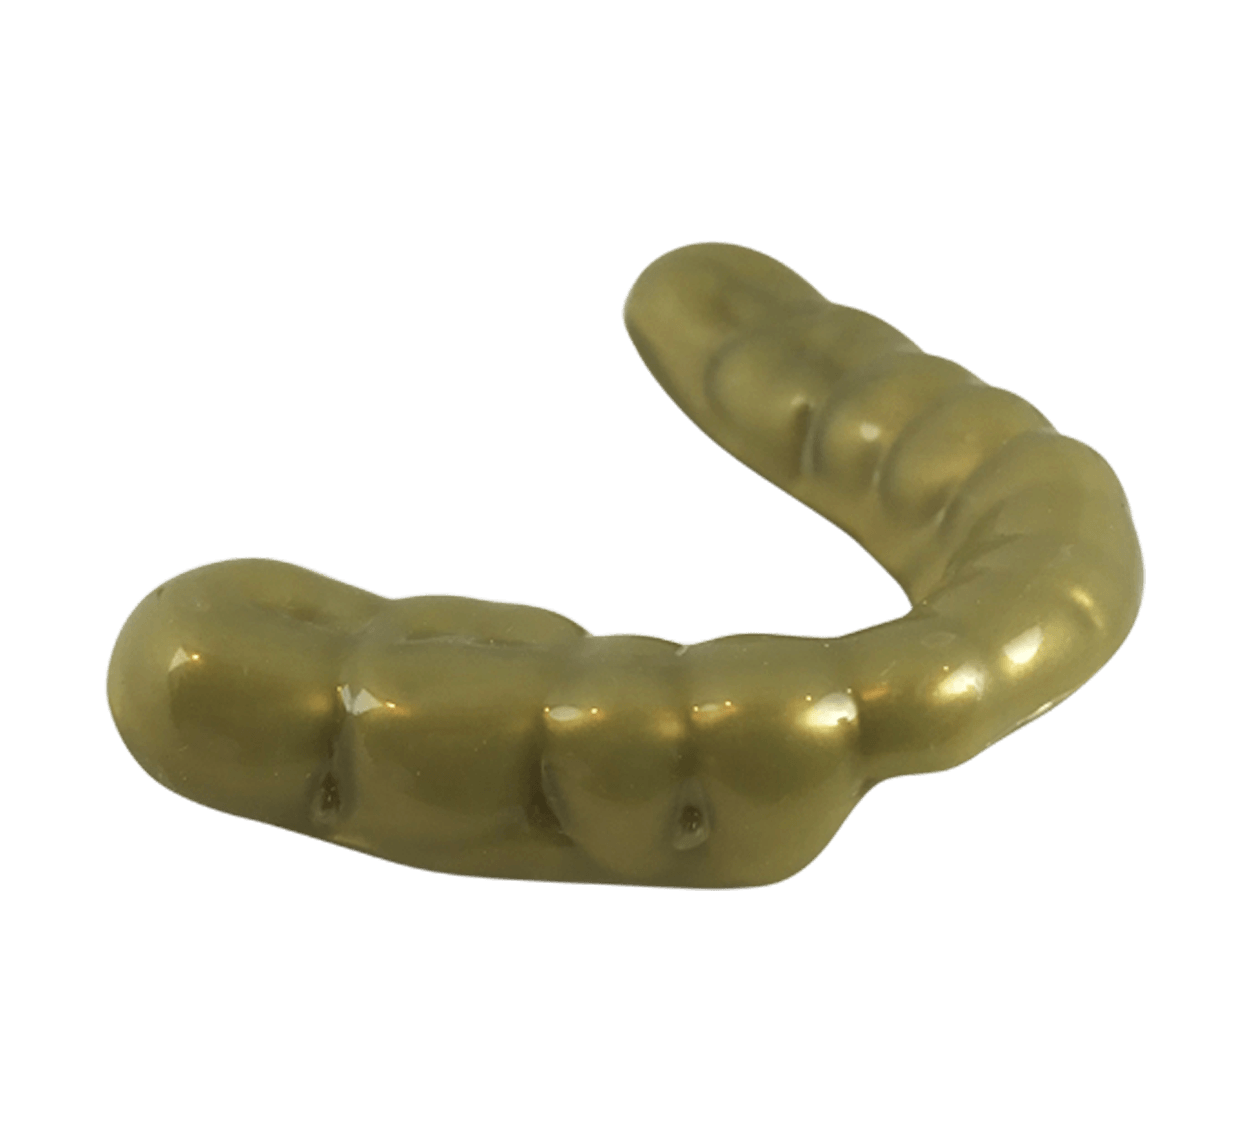 Night Guard for Sleep (VFP) - Damage Control Mouthguards